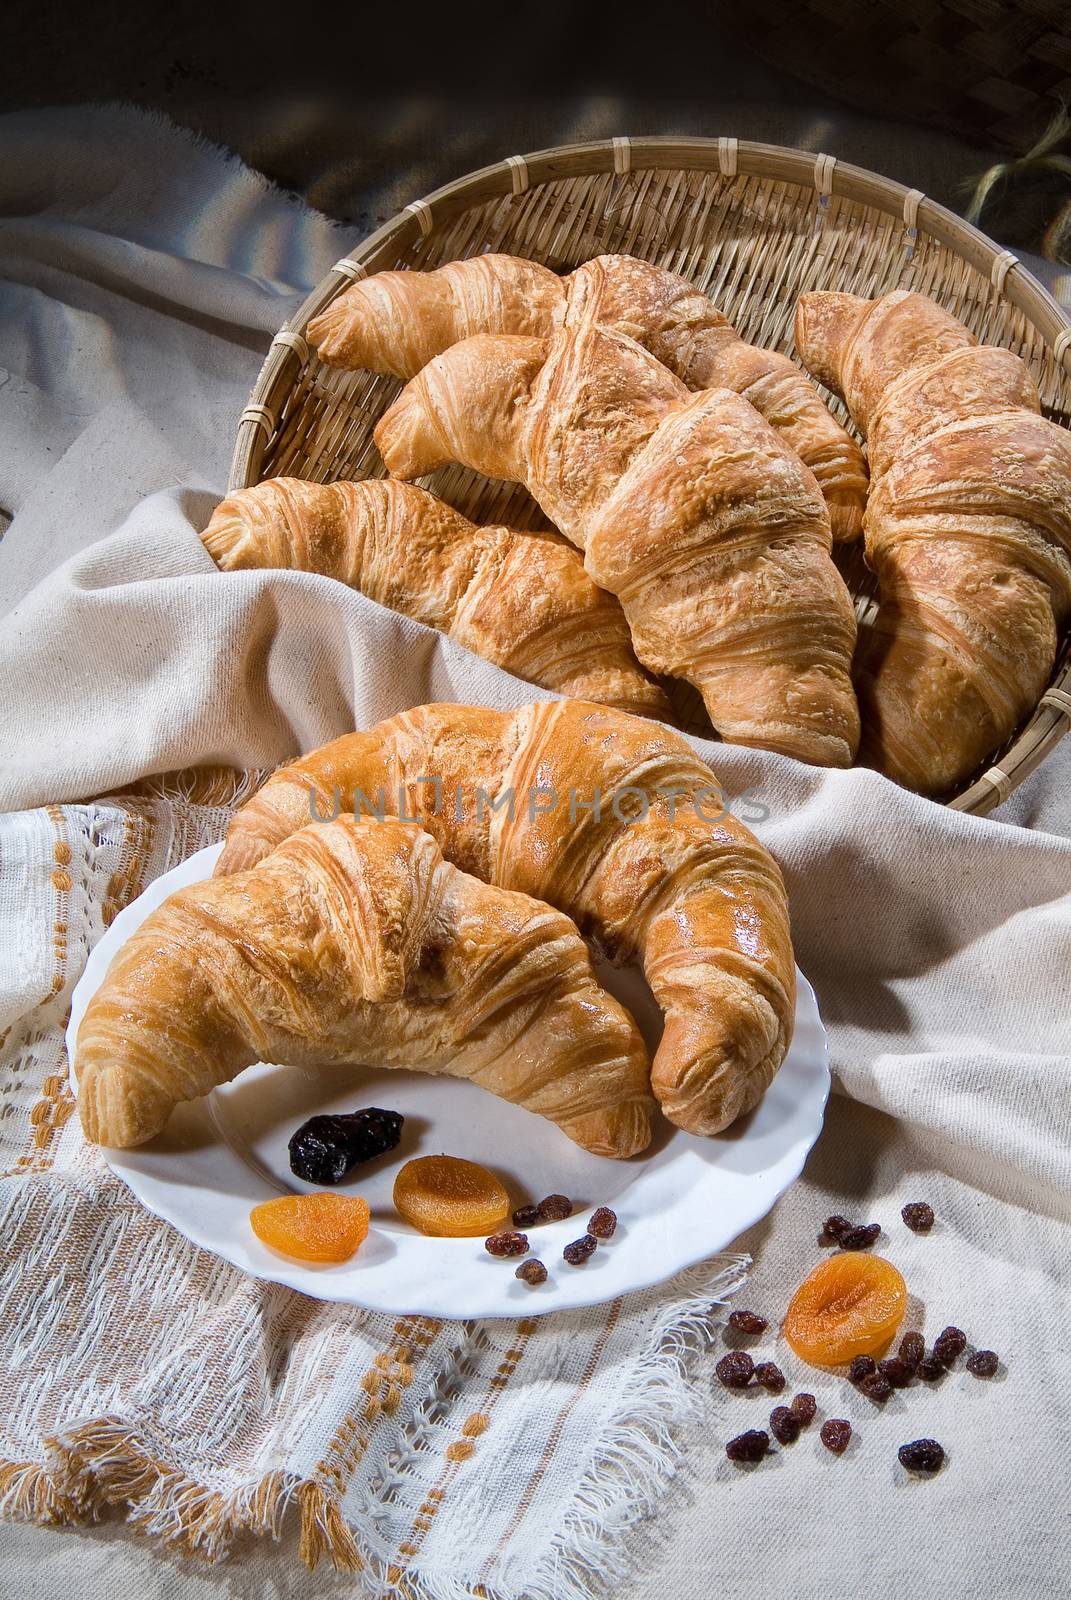 Still Life With Croissants by Fotoskat